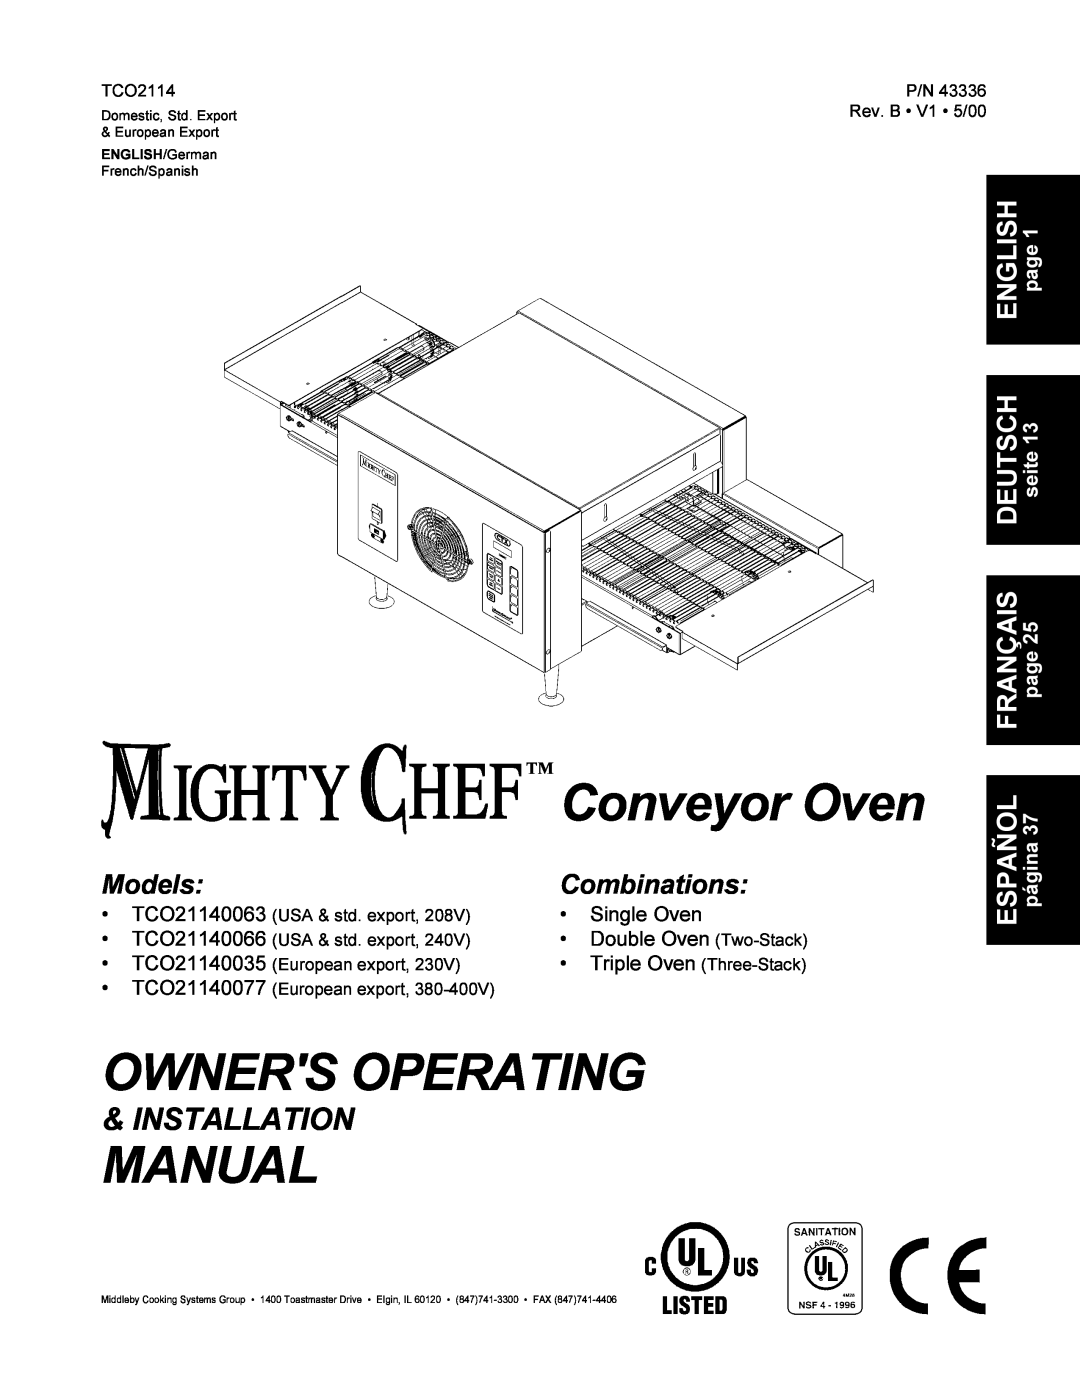 Middleby Cooking Systems Group TCO21140035 installation manual Models, TM Conveyor Oven, Owners Operating, Manual 